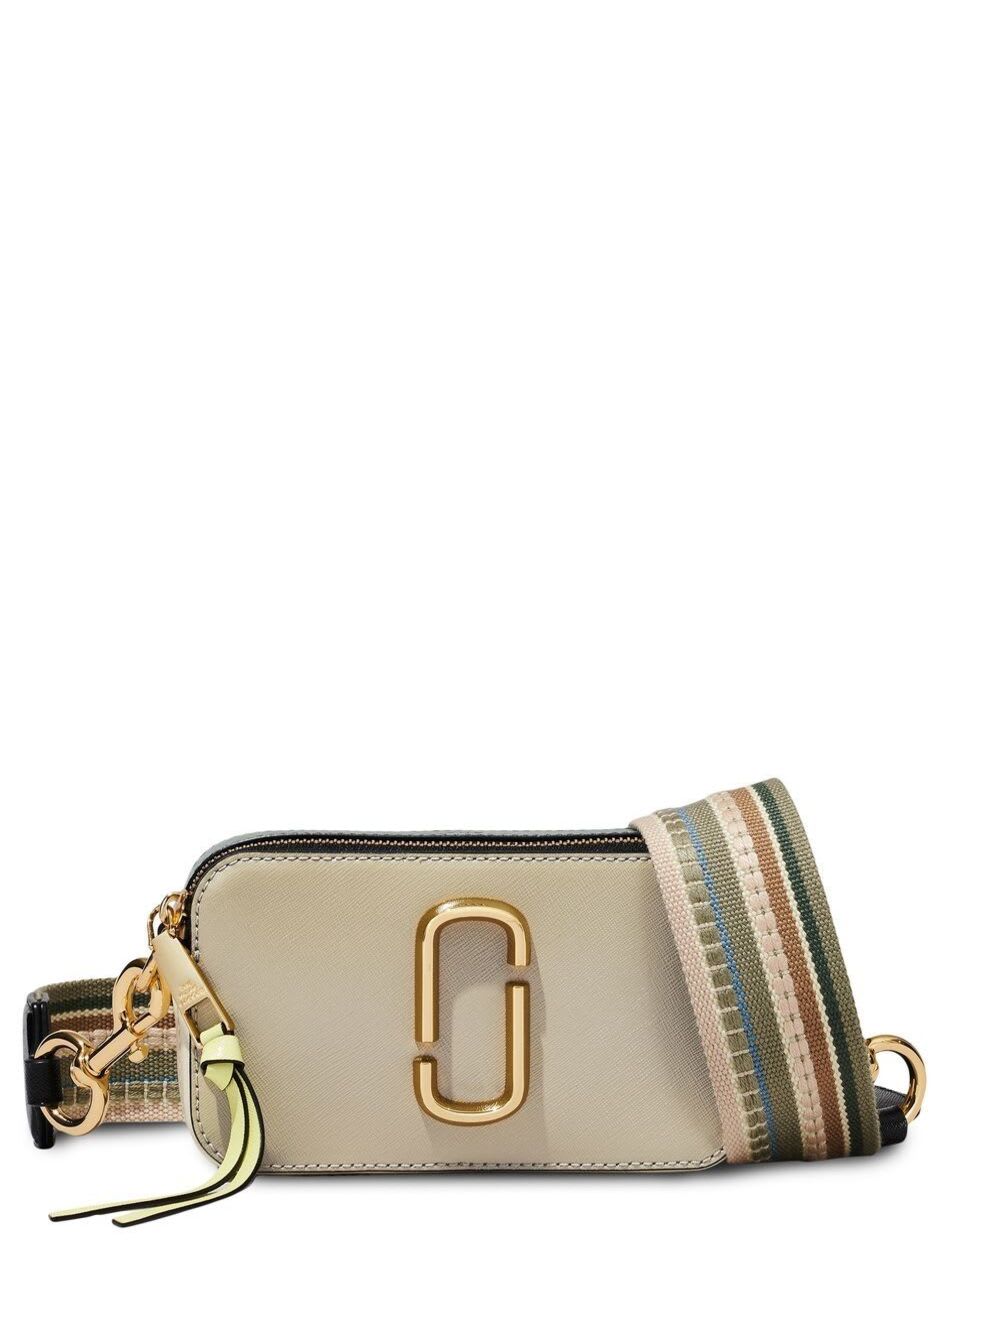 The Snapshot Colorblocked Beige Leather Crossbody Bag Marc Jacobs Woman